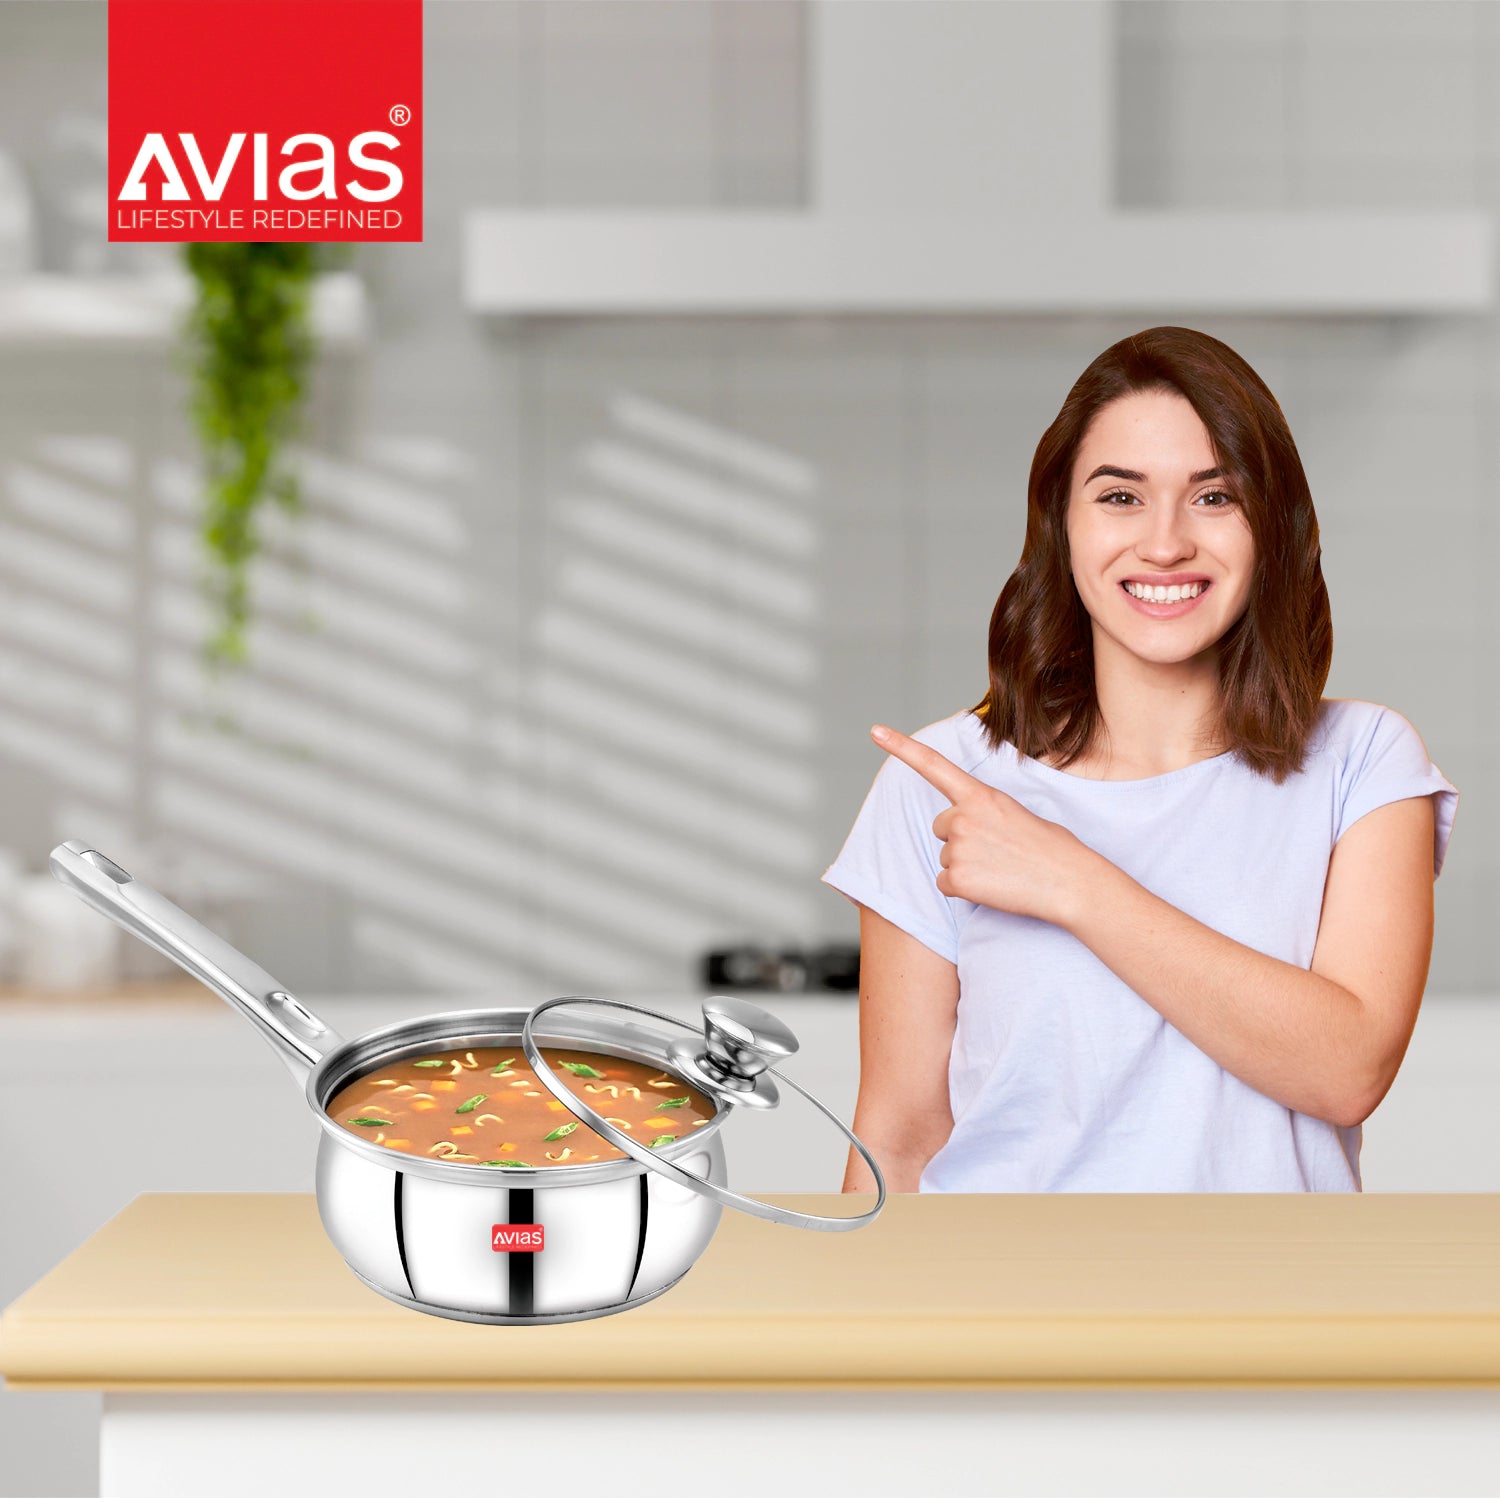 AVIAS Inox IB stainless Steel Saucepan for cooking quality food in the kitchen